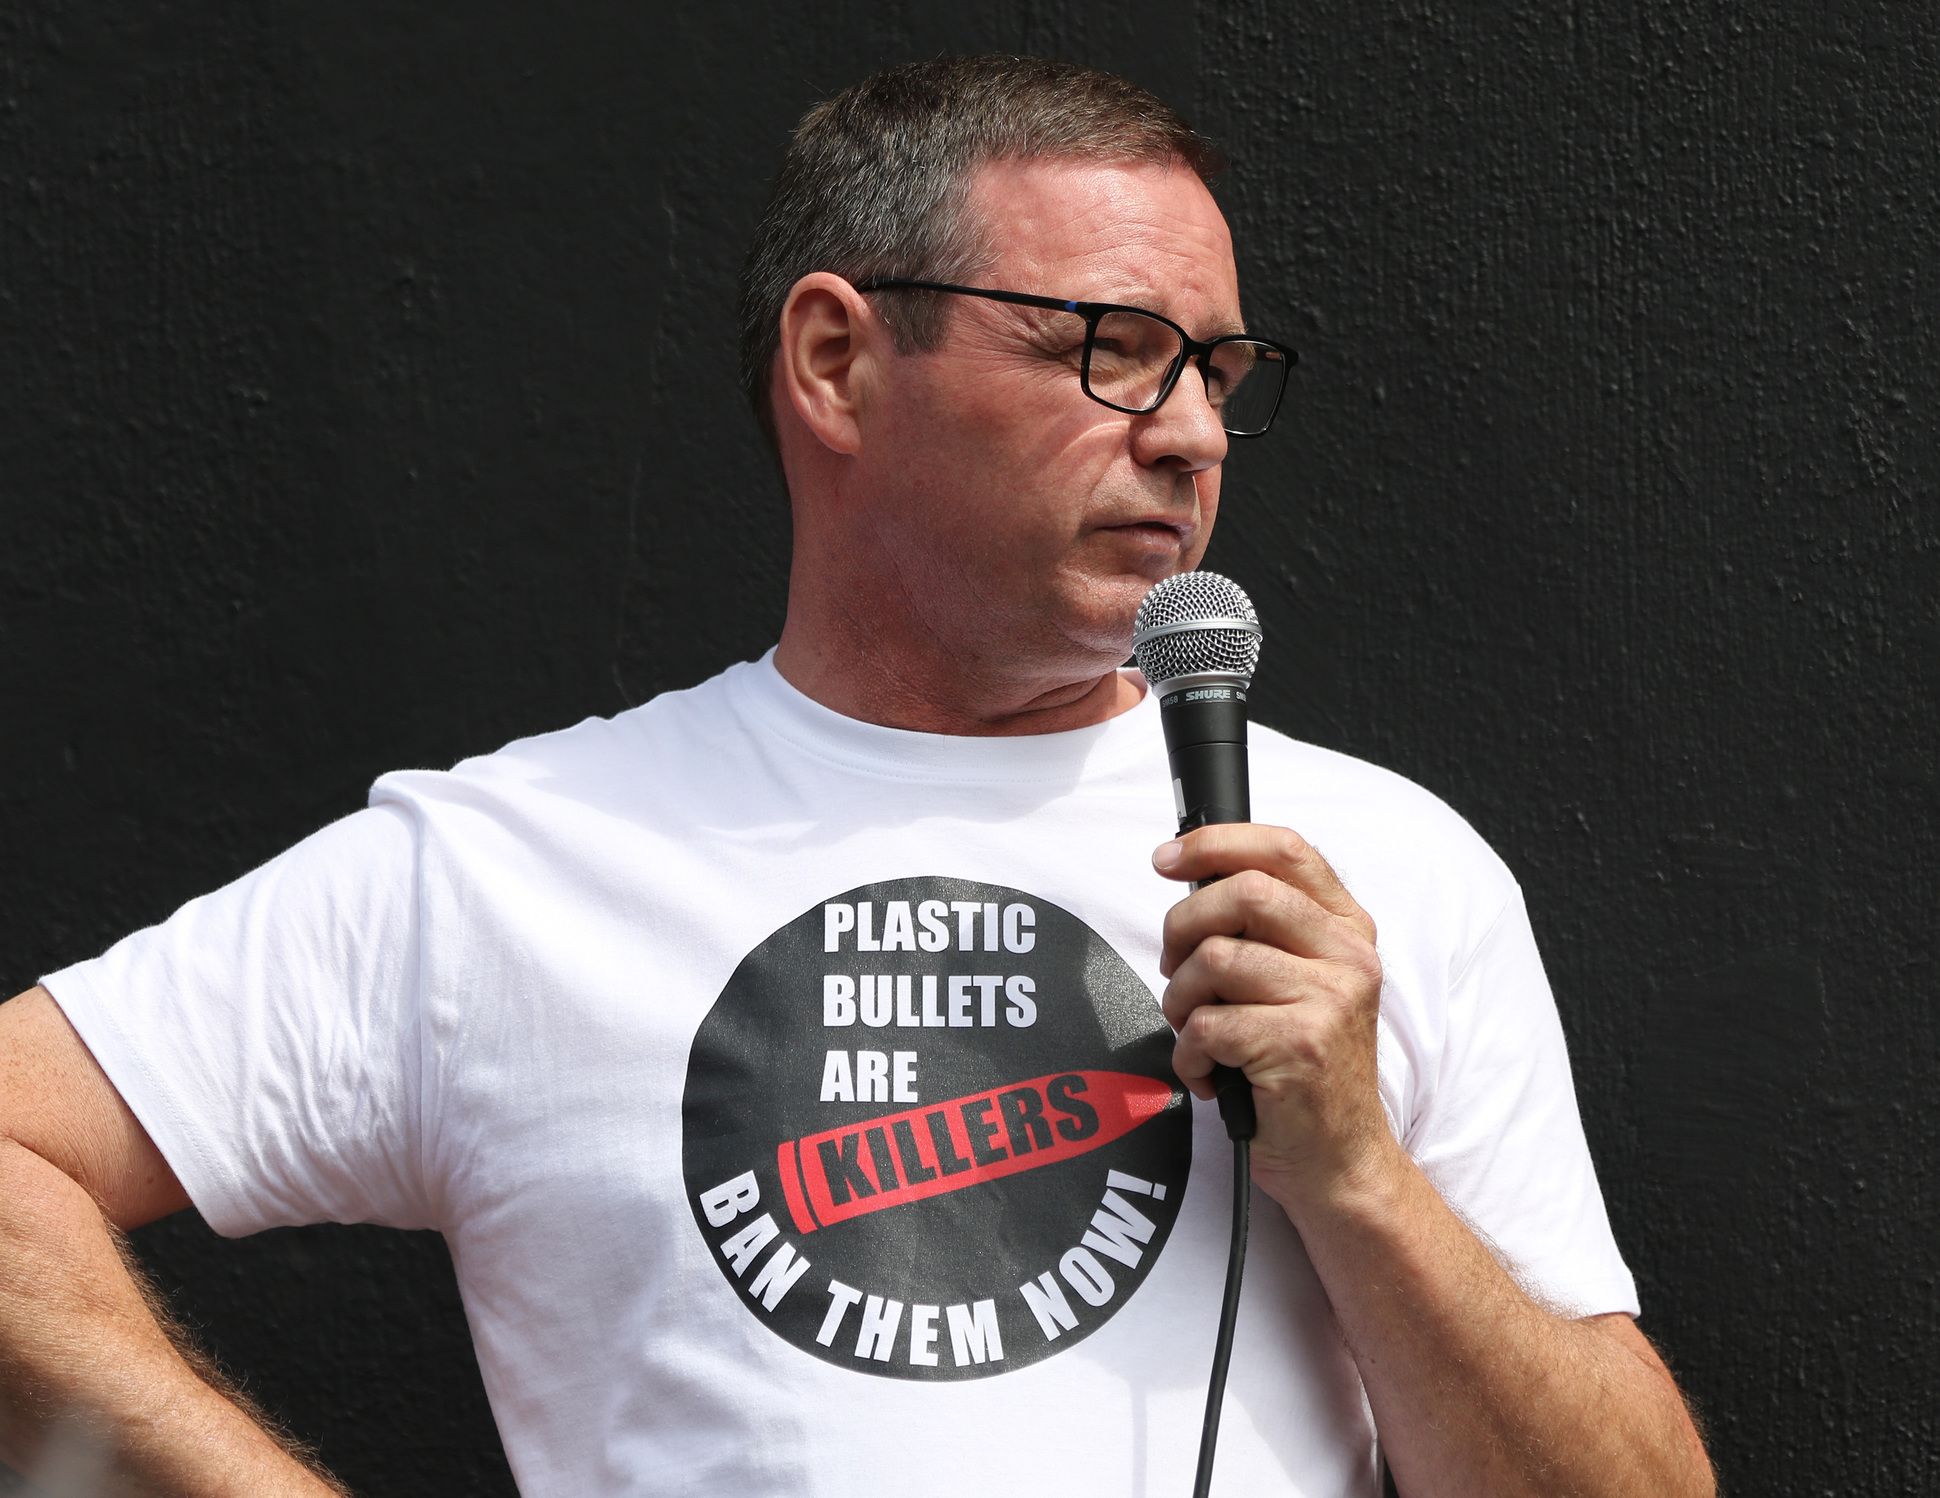 BAN THEM: Mark Kelly of United Campaign Against Plastic Bullets (UCAPB) said plastic bullets need to completely banned 